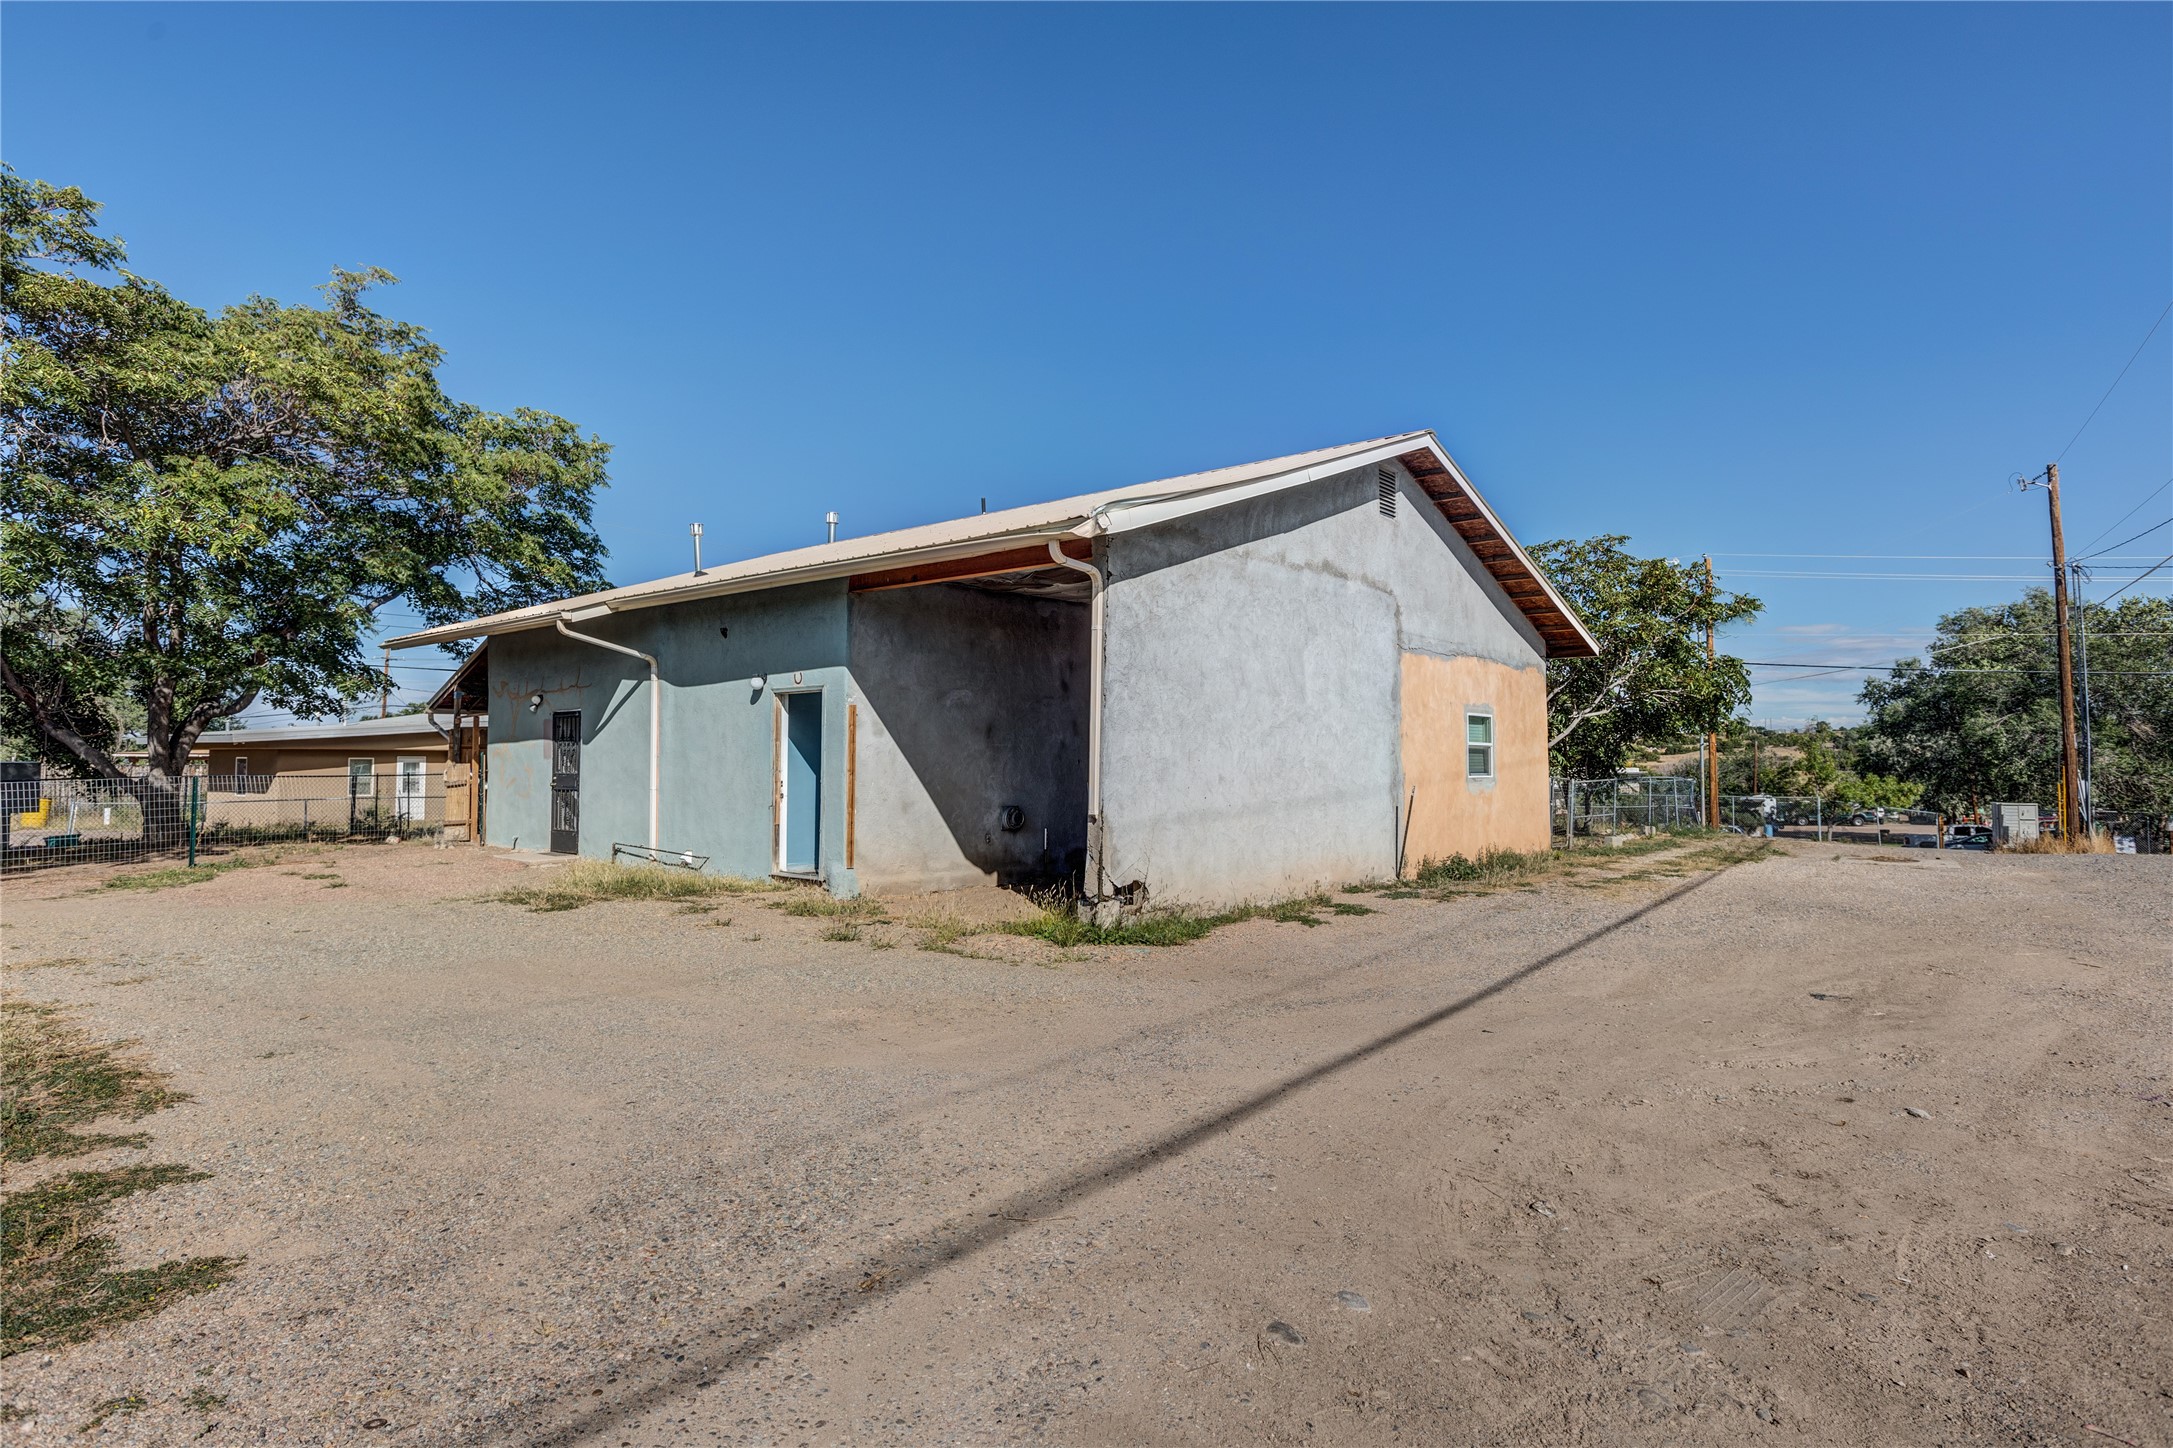 3900 Agua Fria Rd, Santa Fe, New Mexico 87507, 2 Bedrooms Bedrooms, ,1 BathroomBathrooms,Residential,For Sale,3900 Agua Fria Rd,202233252